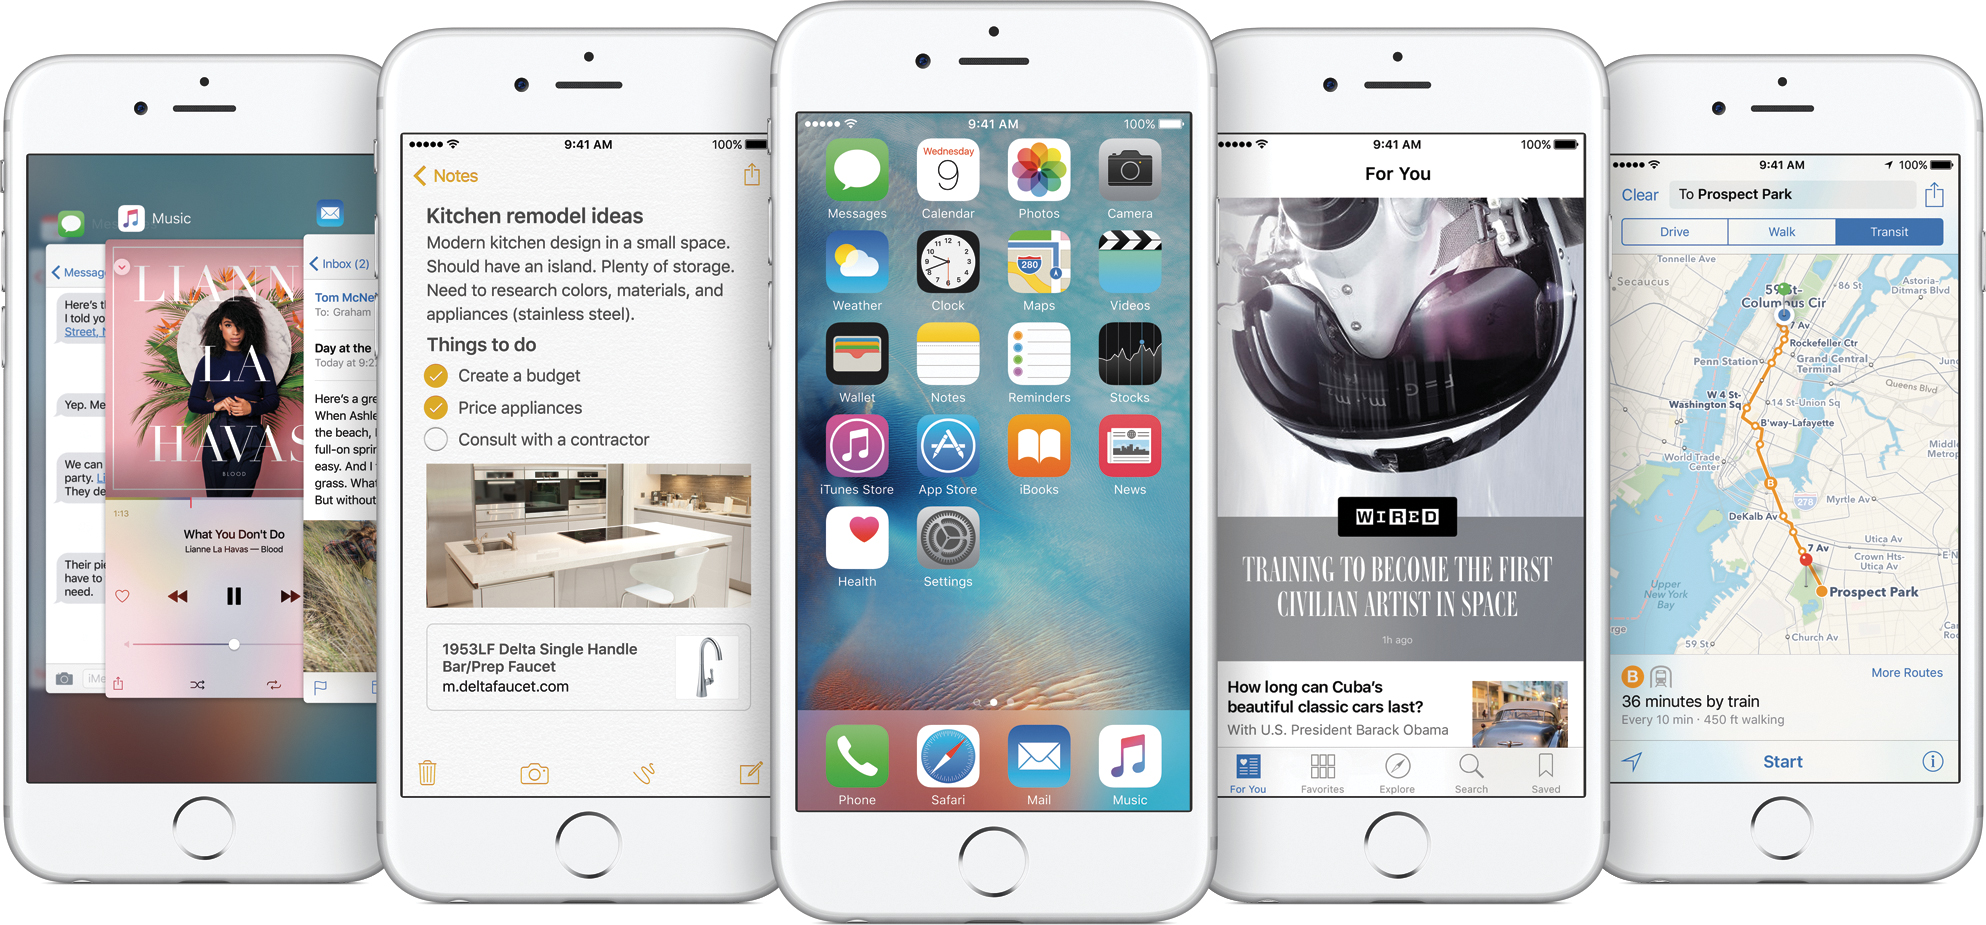 iOS 9 moves towards the fastest adoption in history, already exceeding 50%